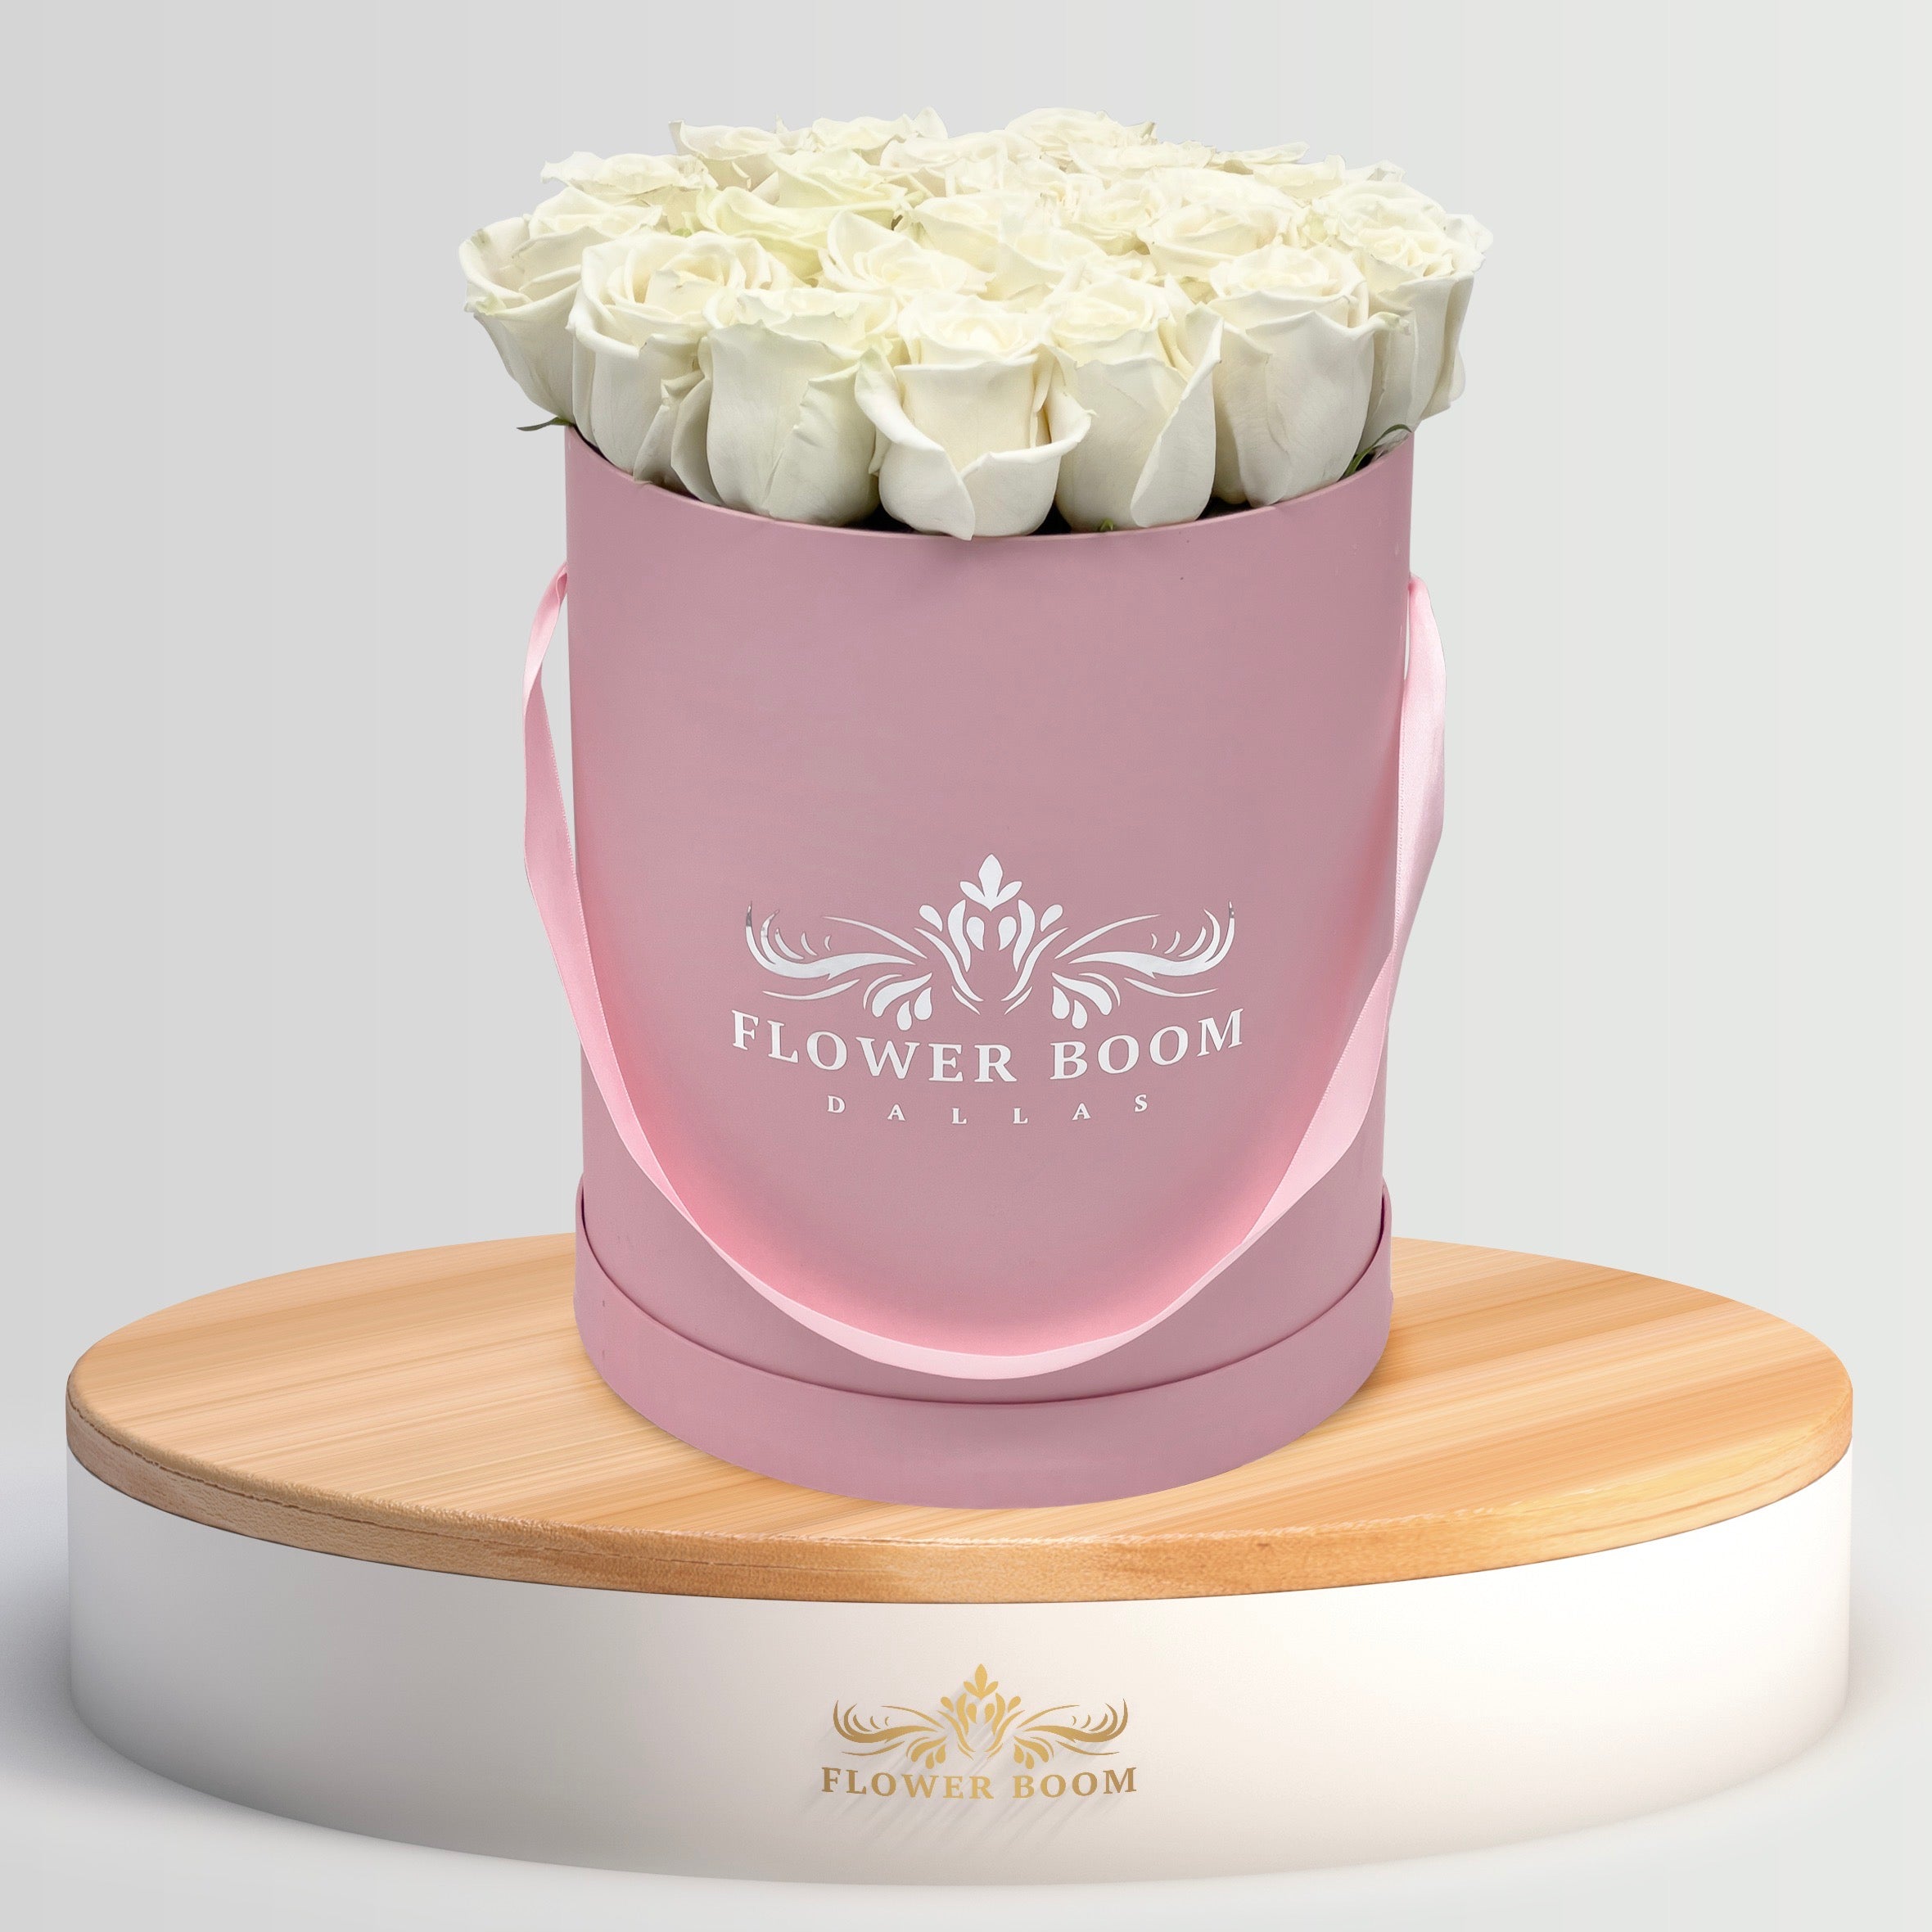 white roses in a pink box